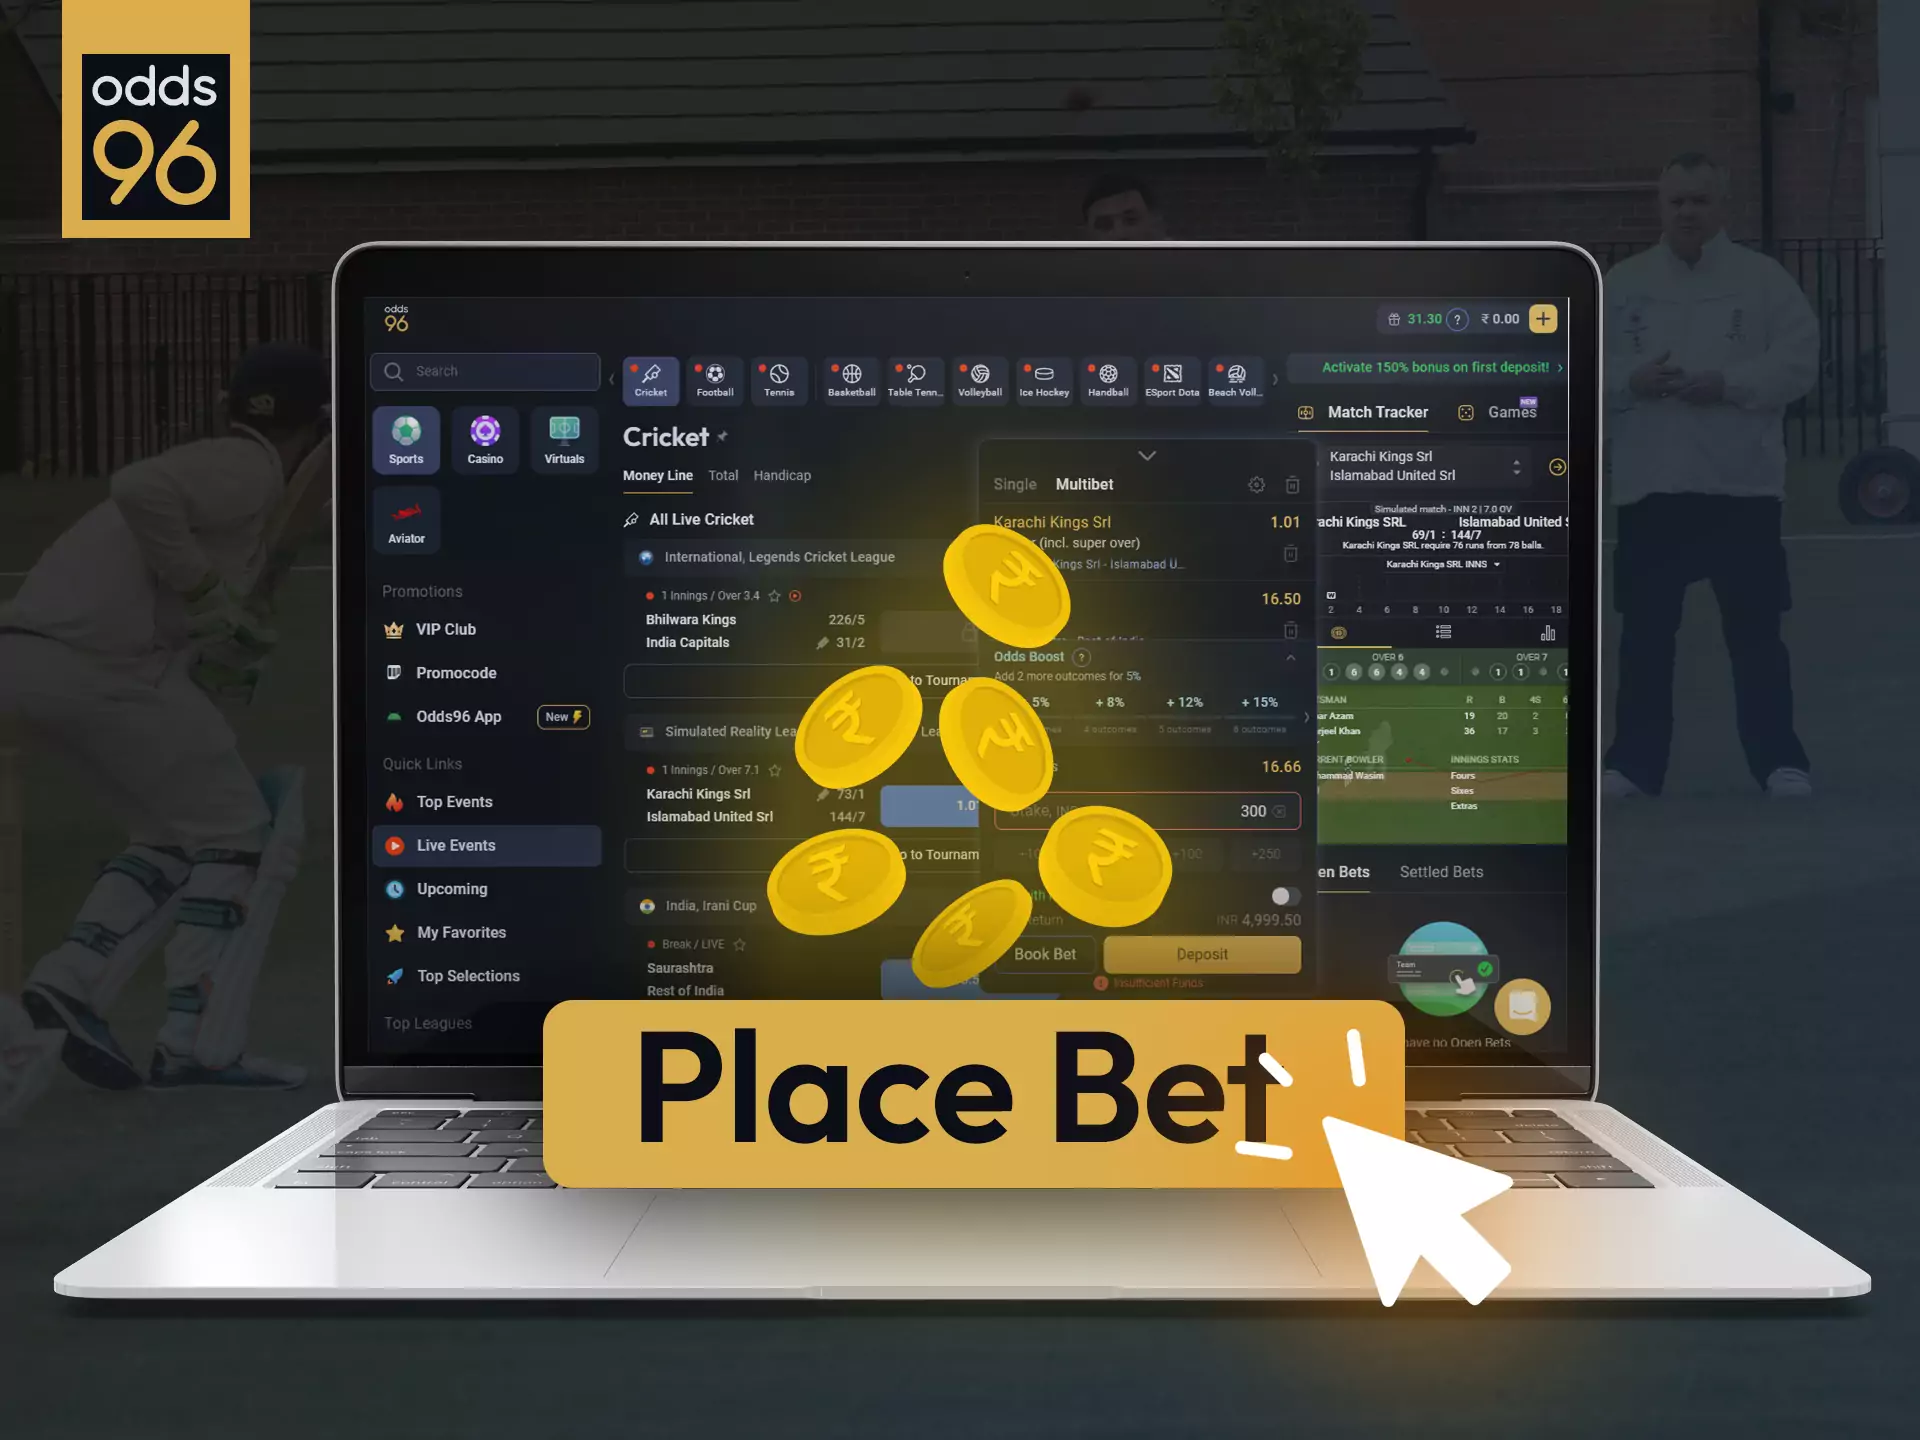 Learn how to make your first bet in Odds96 with this instruction.